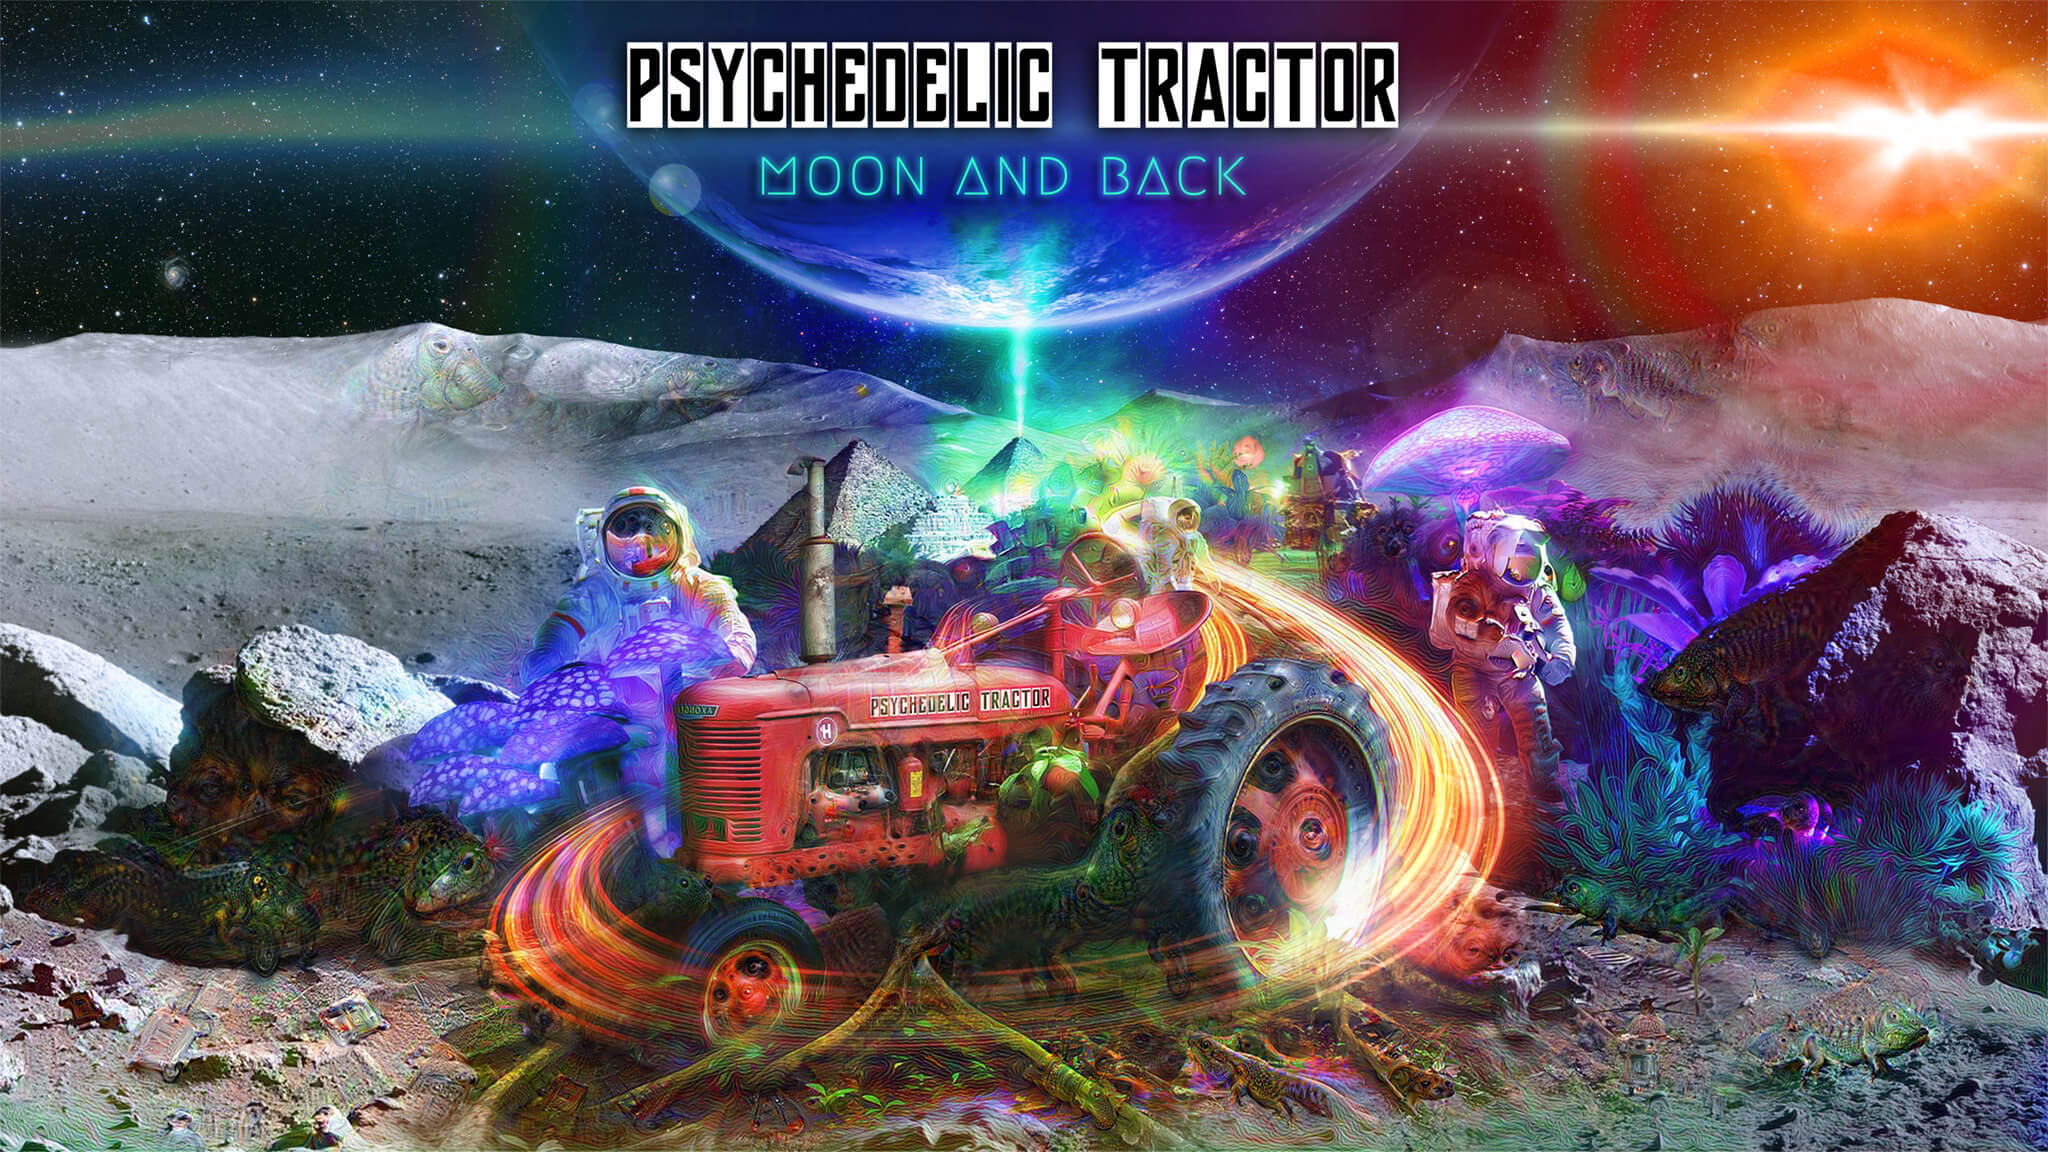 Psychedelic Tractor Cover Art by Axon Genesis